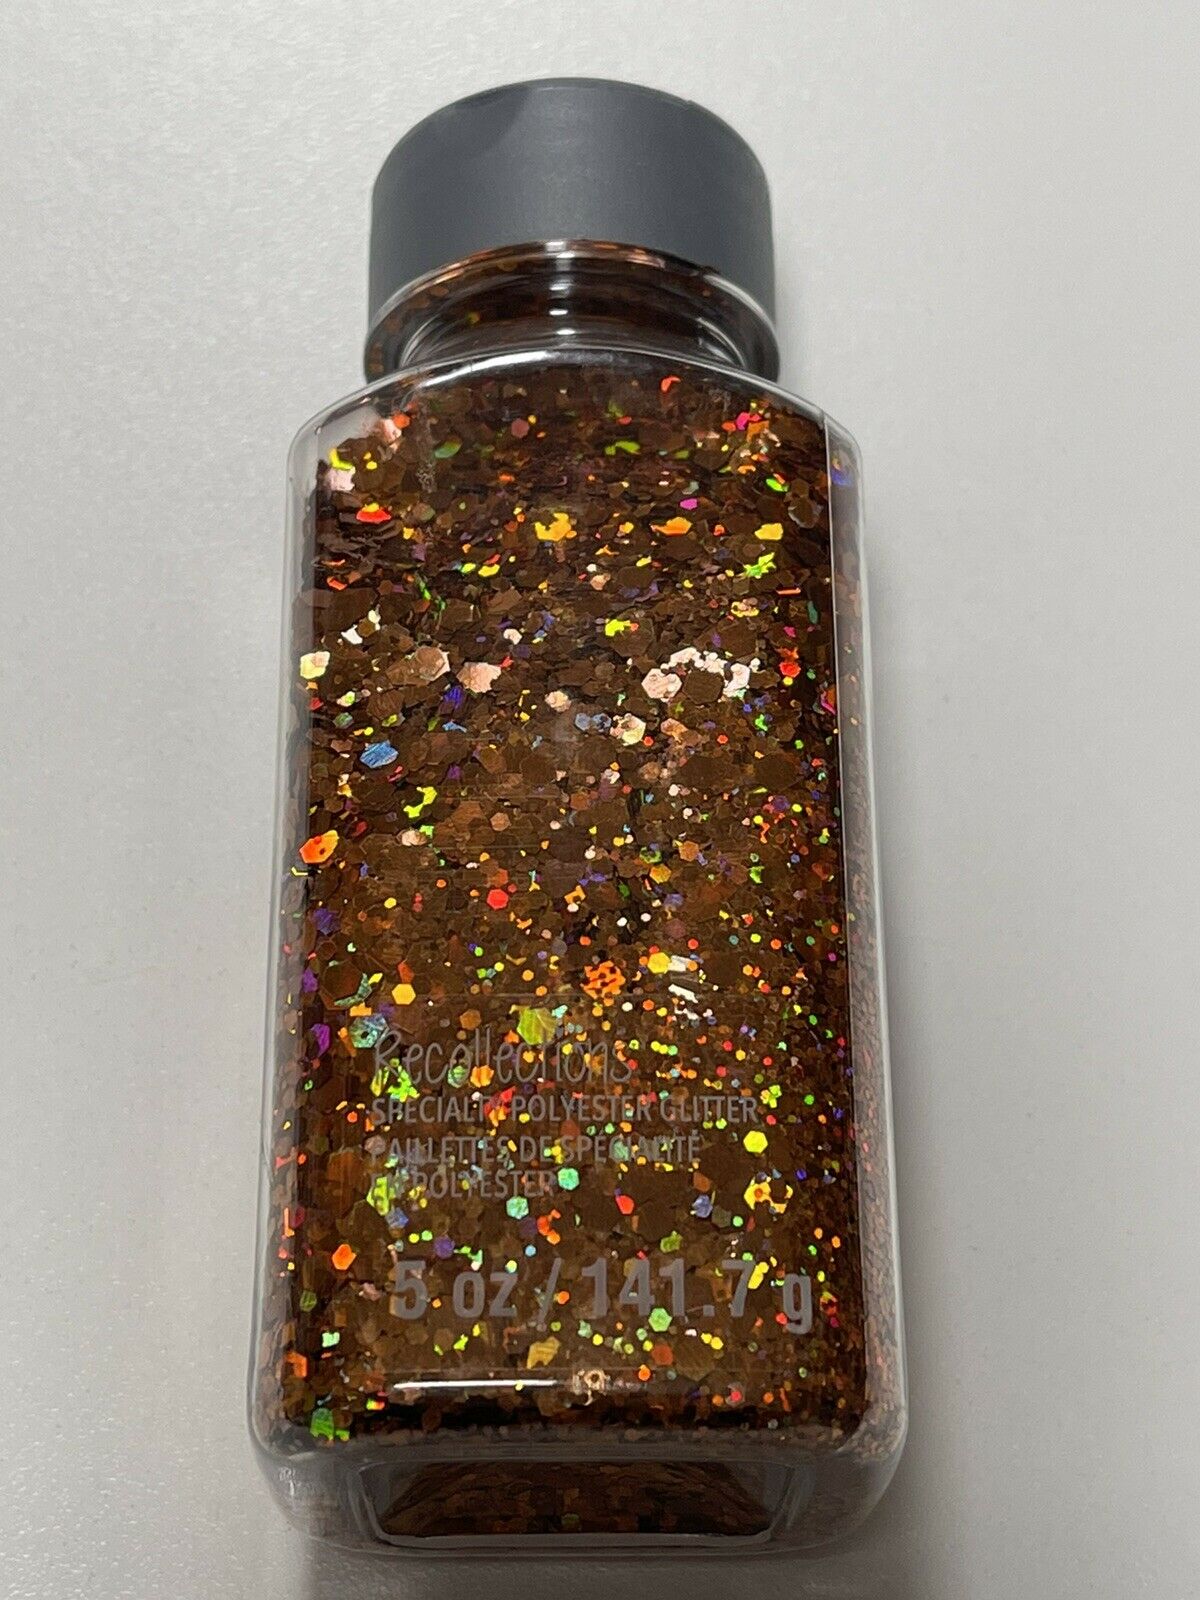 Recollections Specialty Polyester Glitter In Shaker 5oz Holographic “orange” New